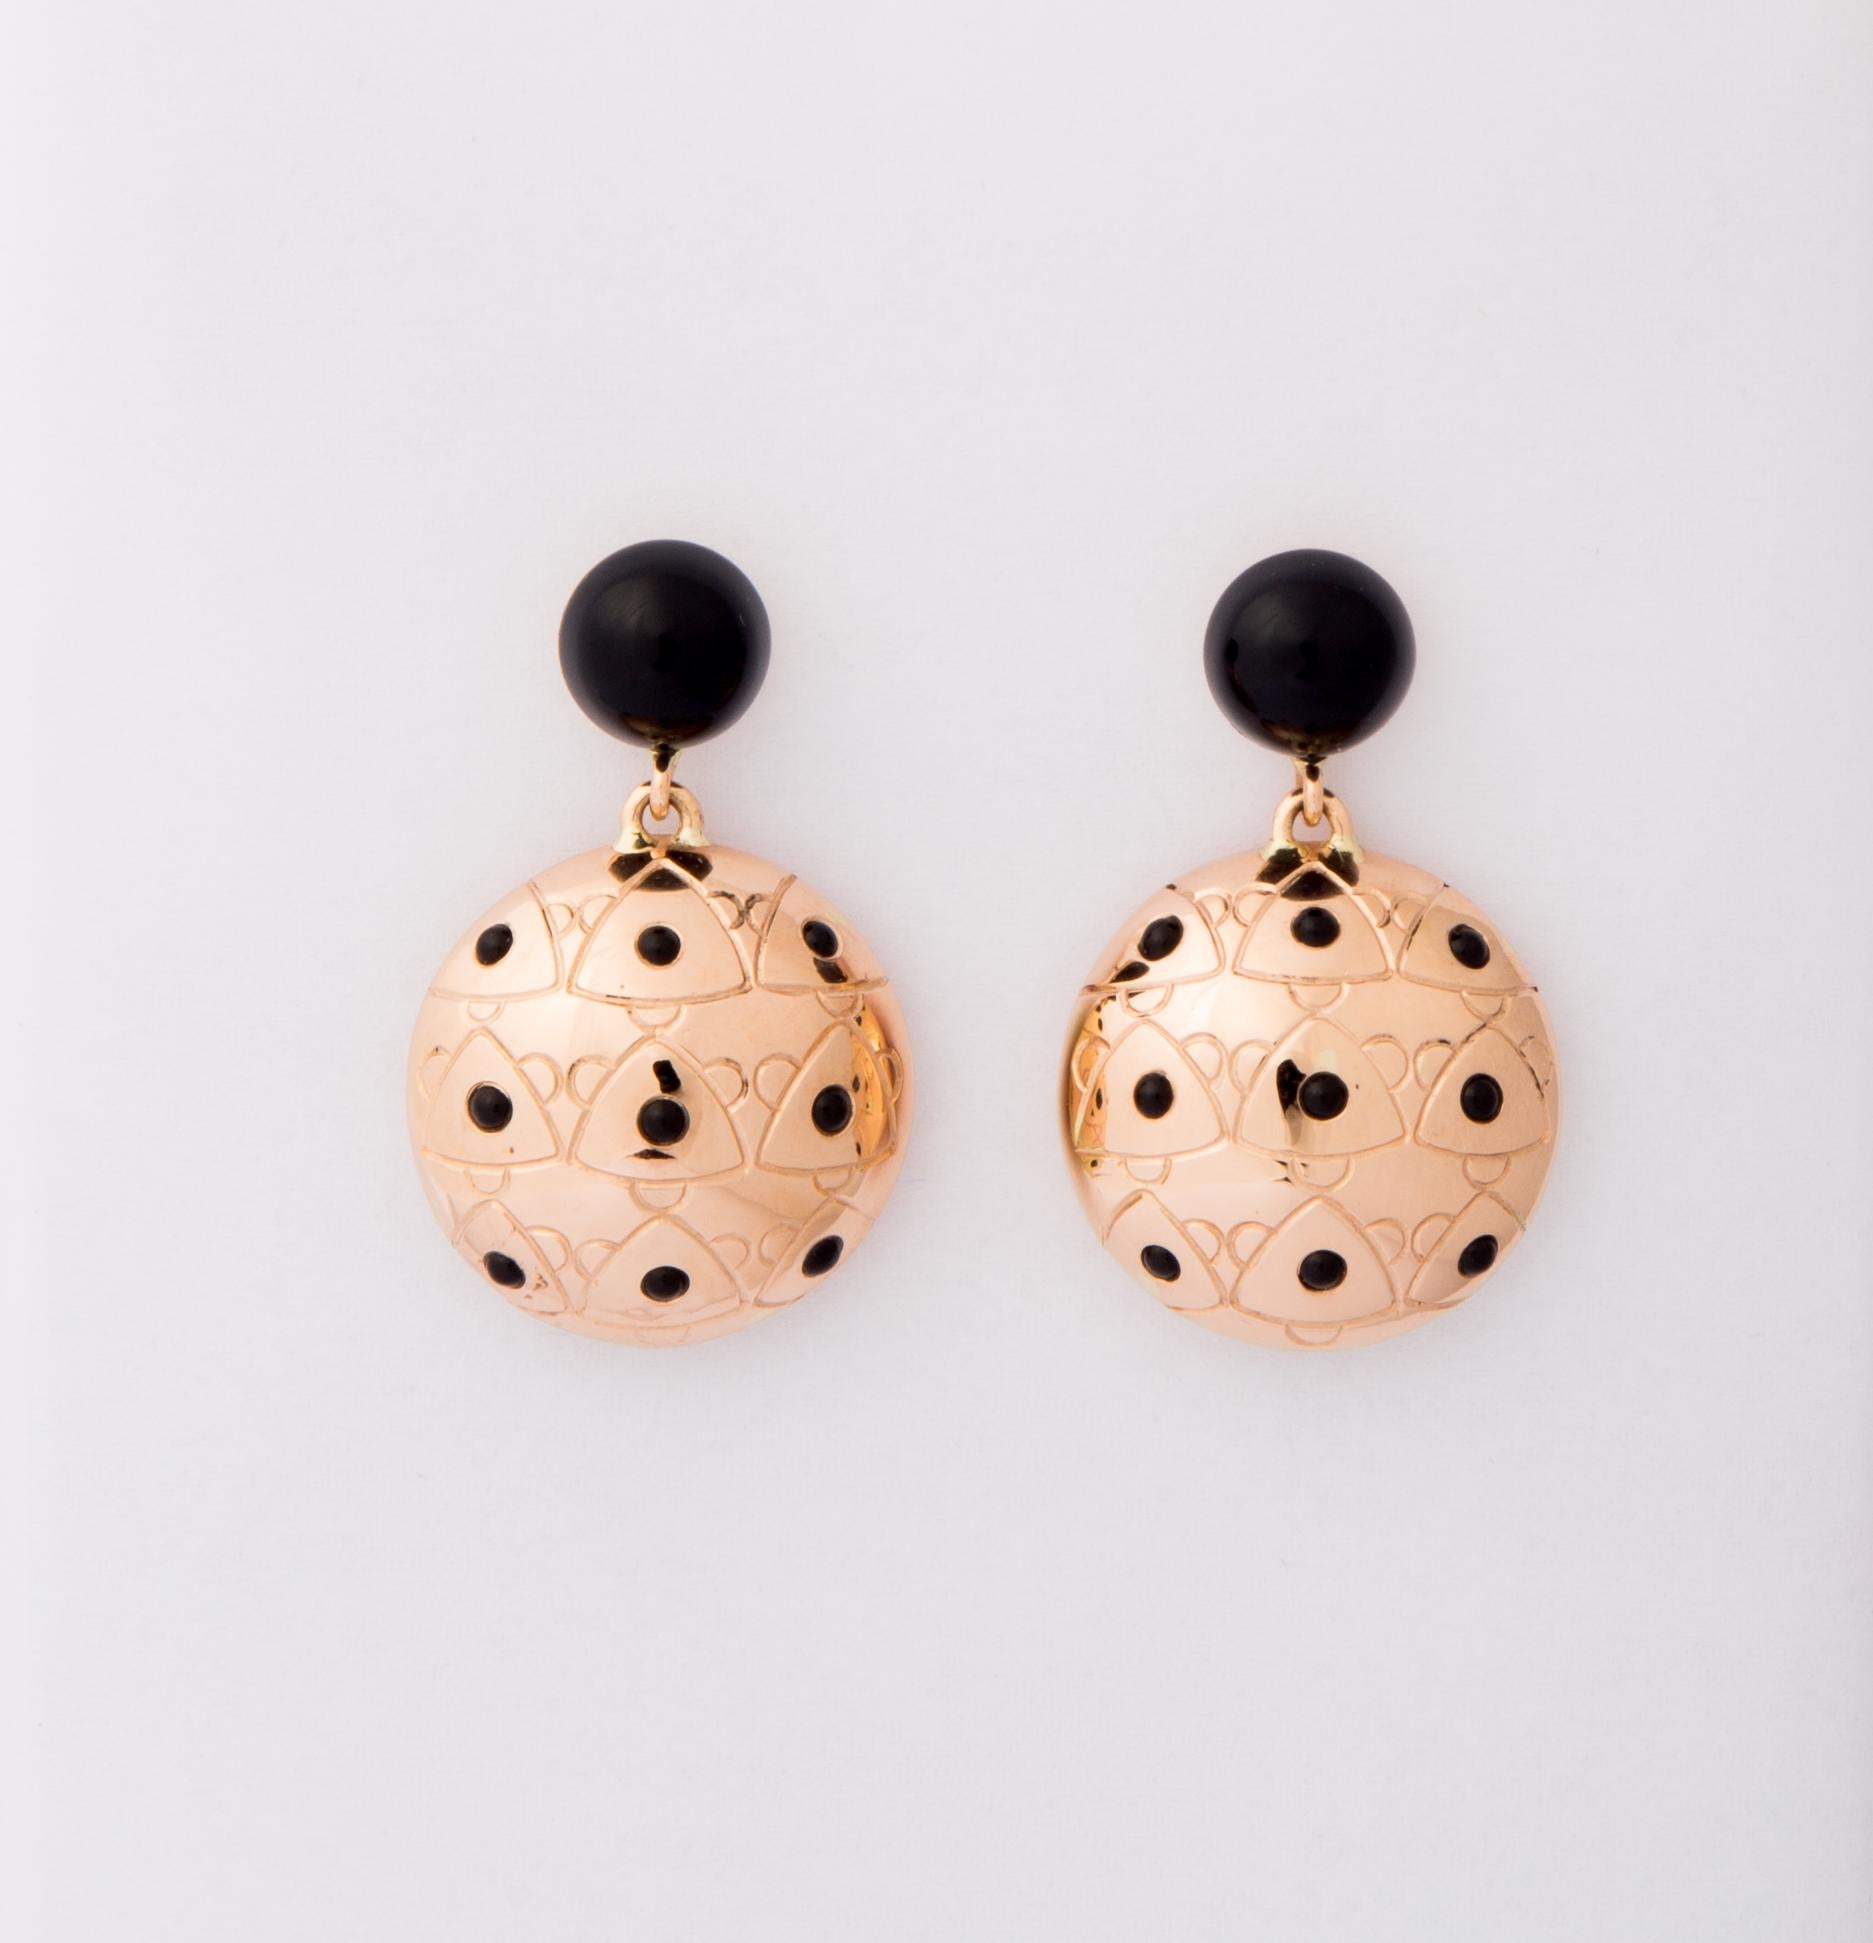 Contemporary Sea Urchin Earrings with Onyx and Gold 18 Karat For Sale